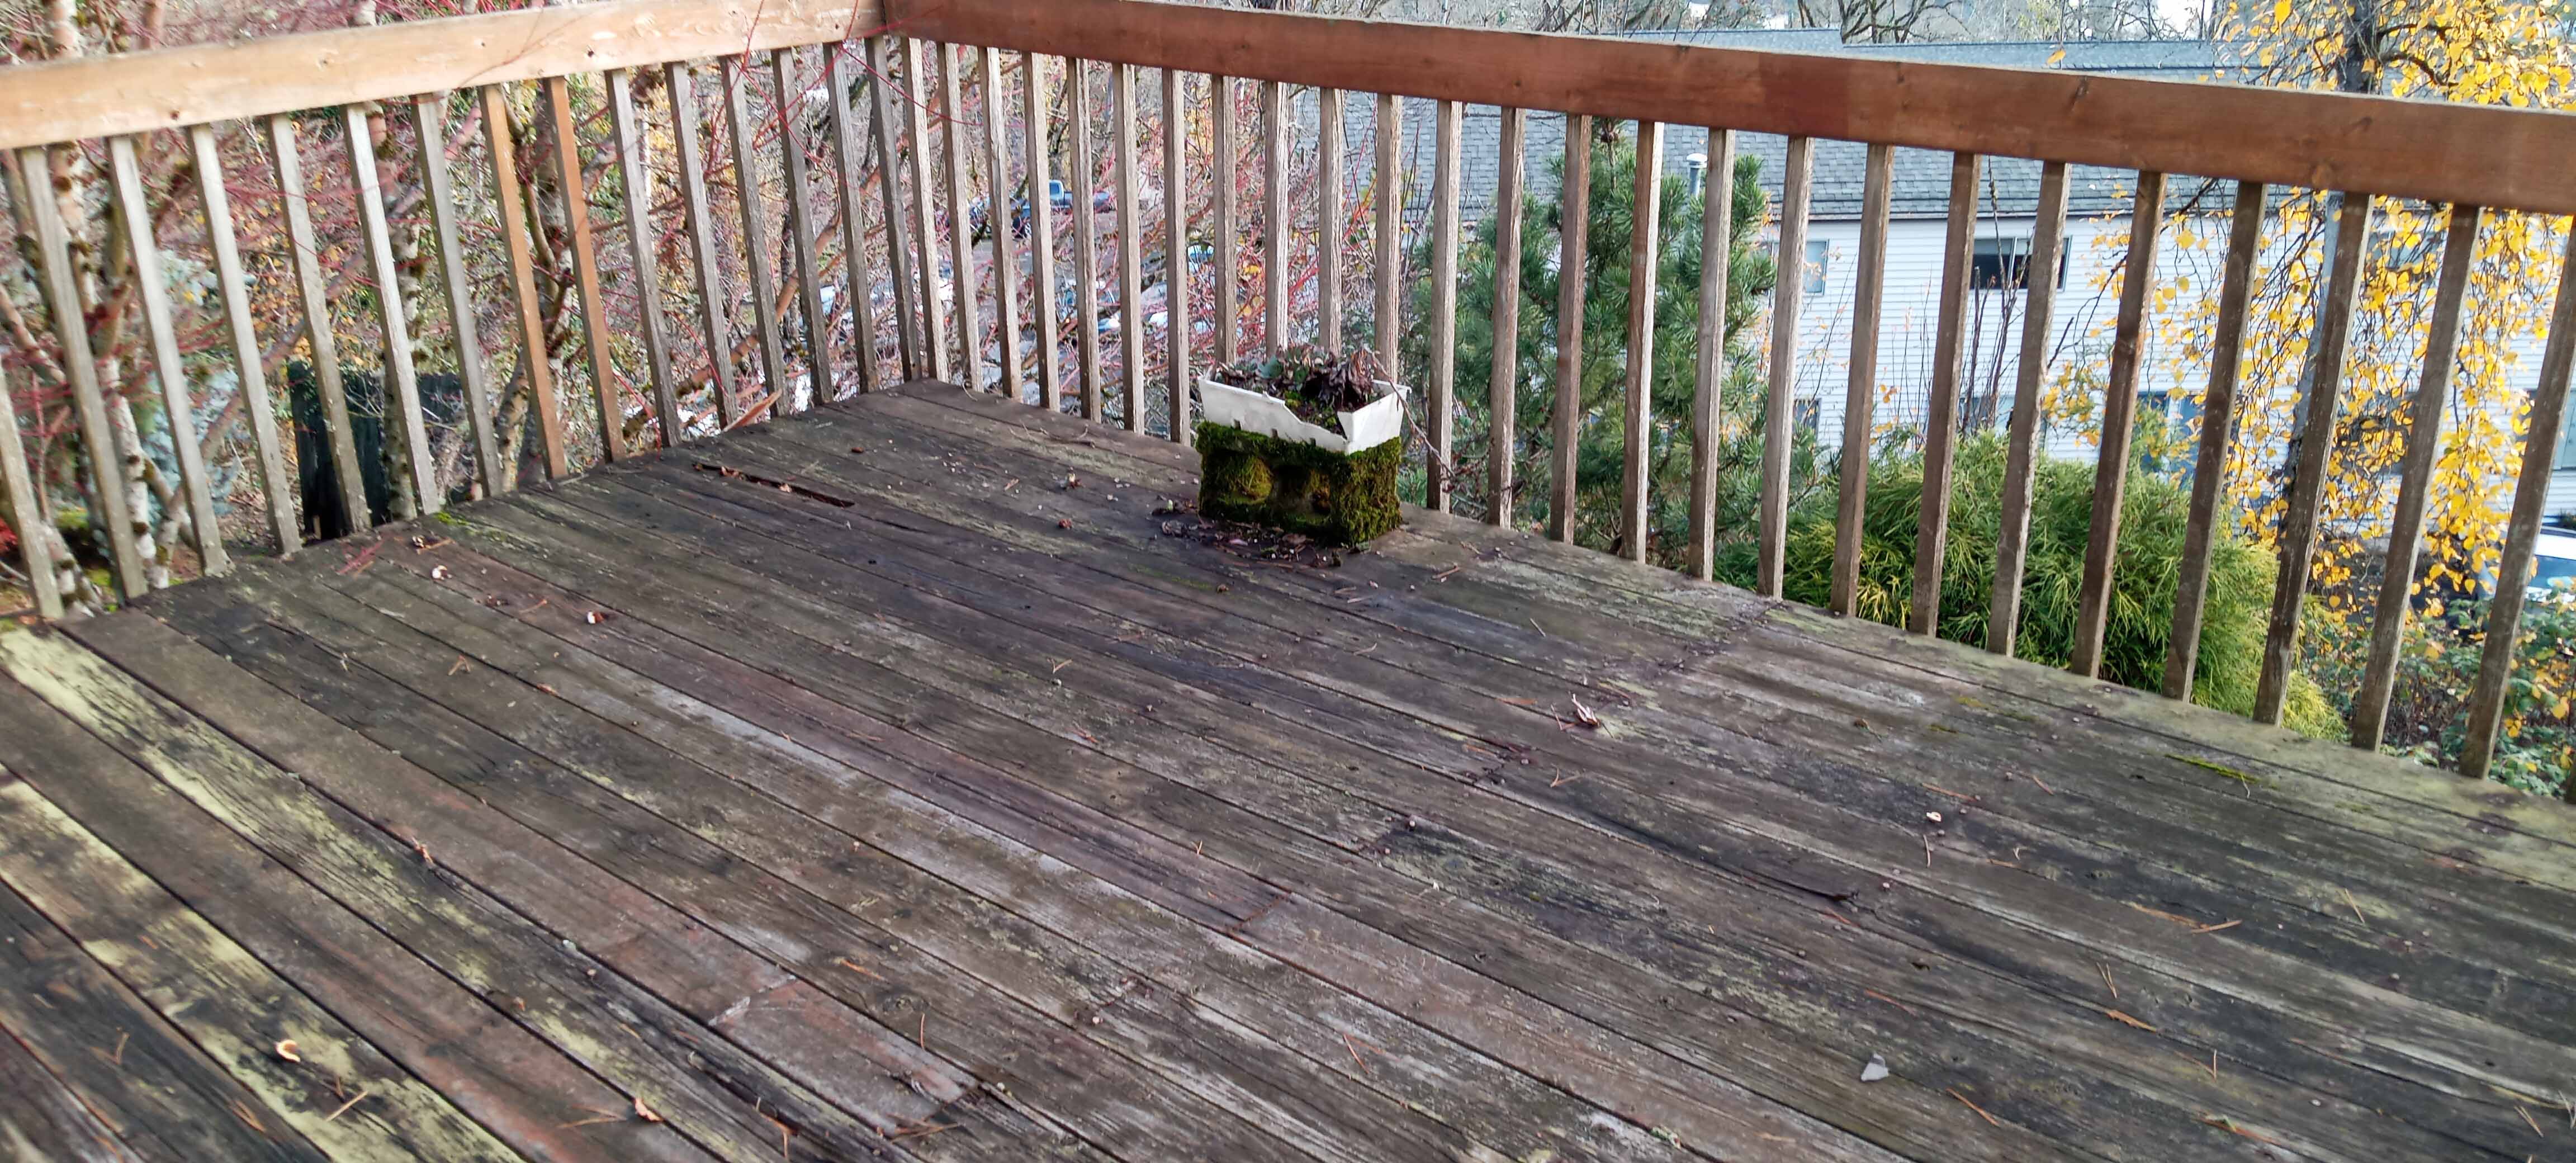 Old deck with rotting boards before remodel